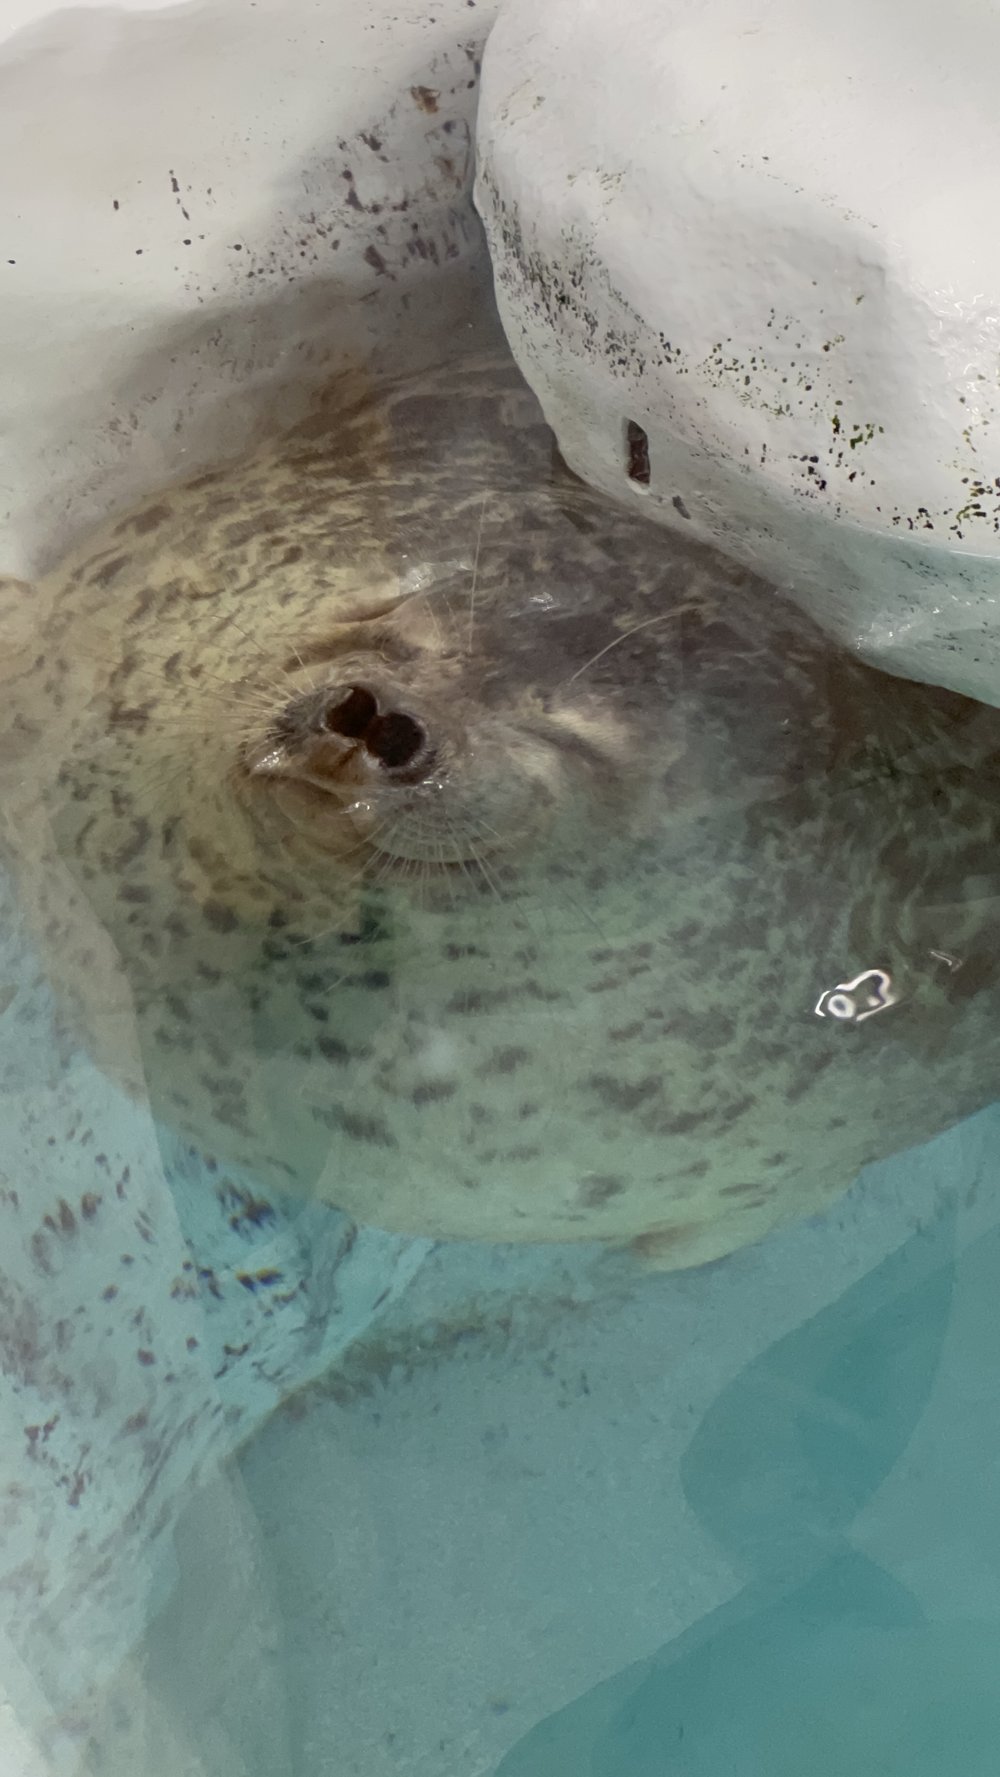  View of a ringed seal breathing while in the water 